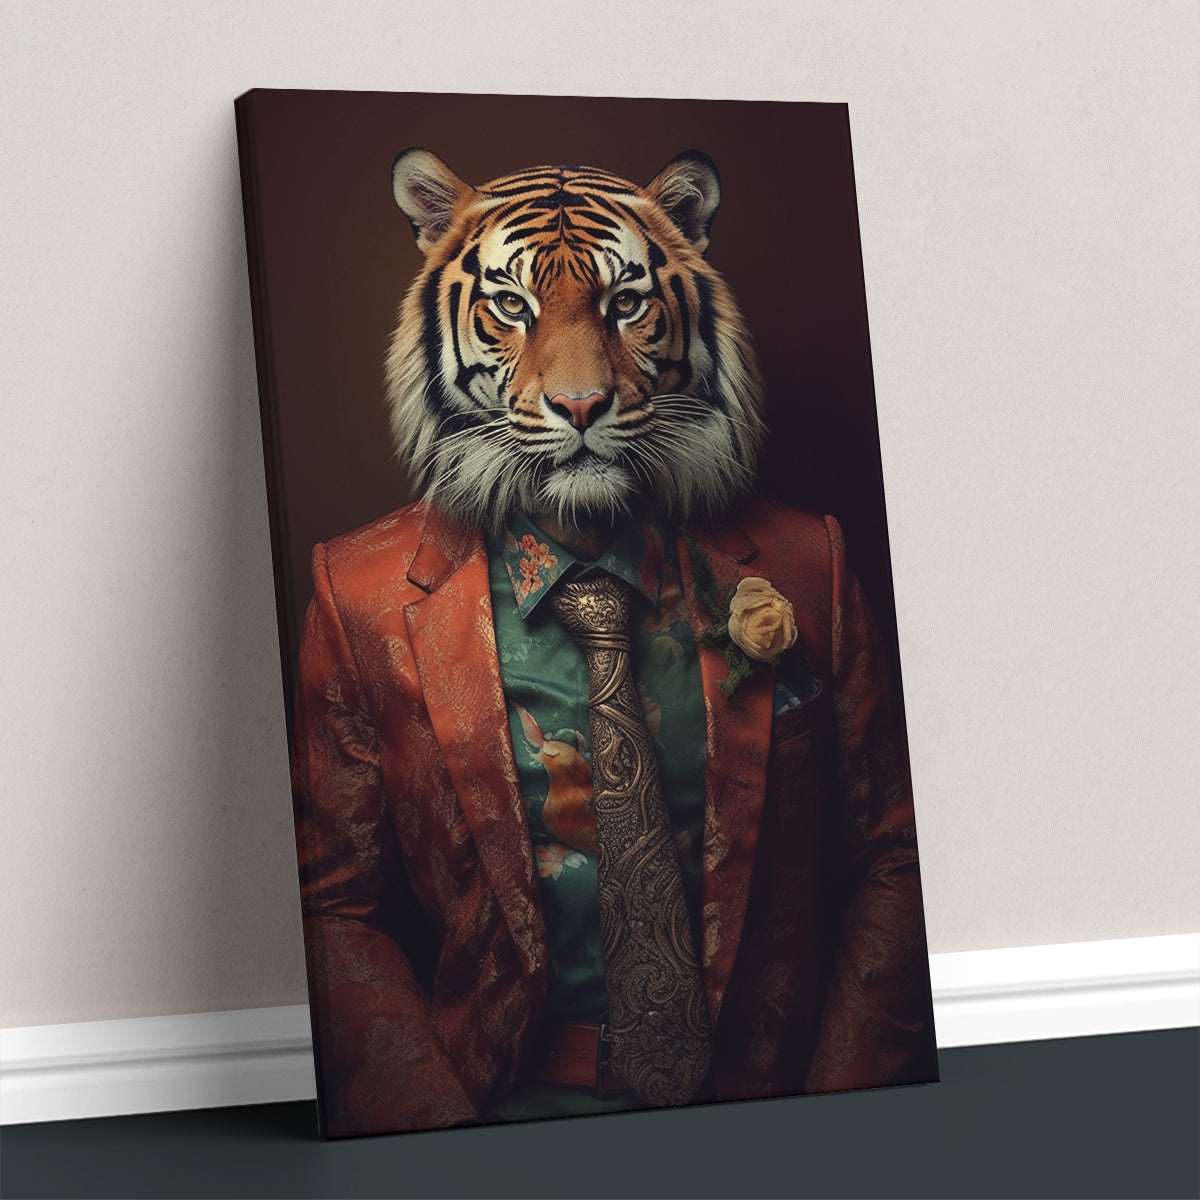 Charming Tiger Gentleman for Office Canvas Prints Artesty 1 Panel 16"x24" 